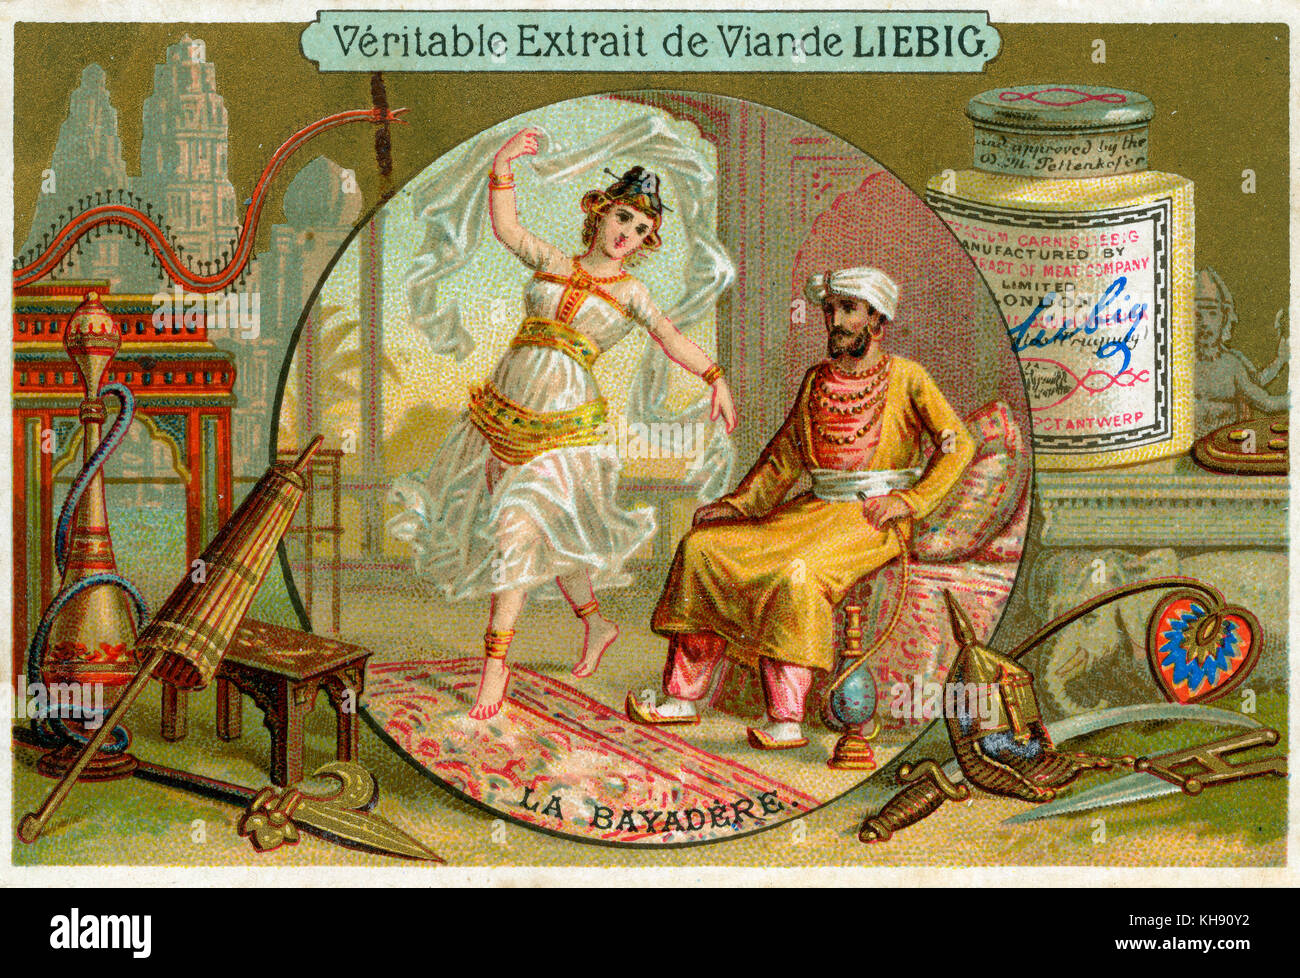 The Temple Maiden, also known as The Temple Dancer. Ballet originally choreographed by Marius Petipa to the music of Ludwig Minkus. First performance 1877. Caption reads: 'La Bayadère'. Liebig card series (1889). Stock Photo